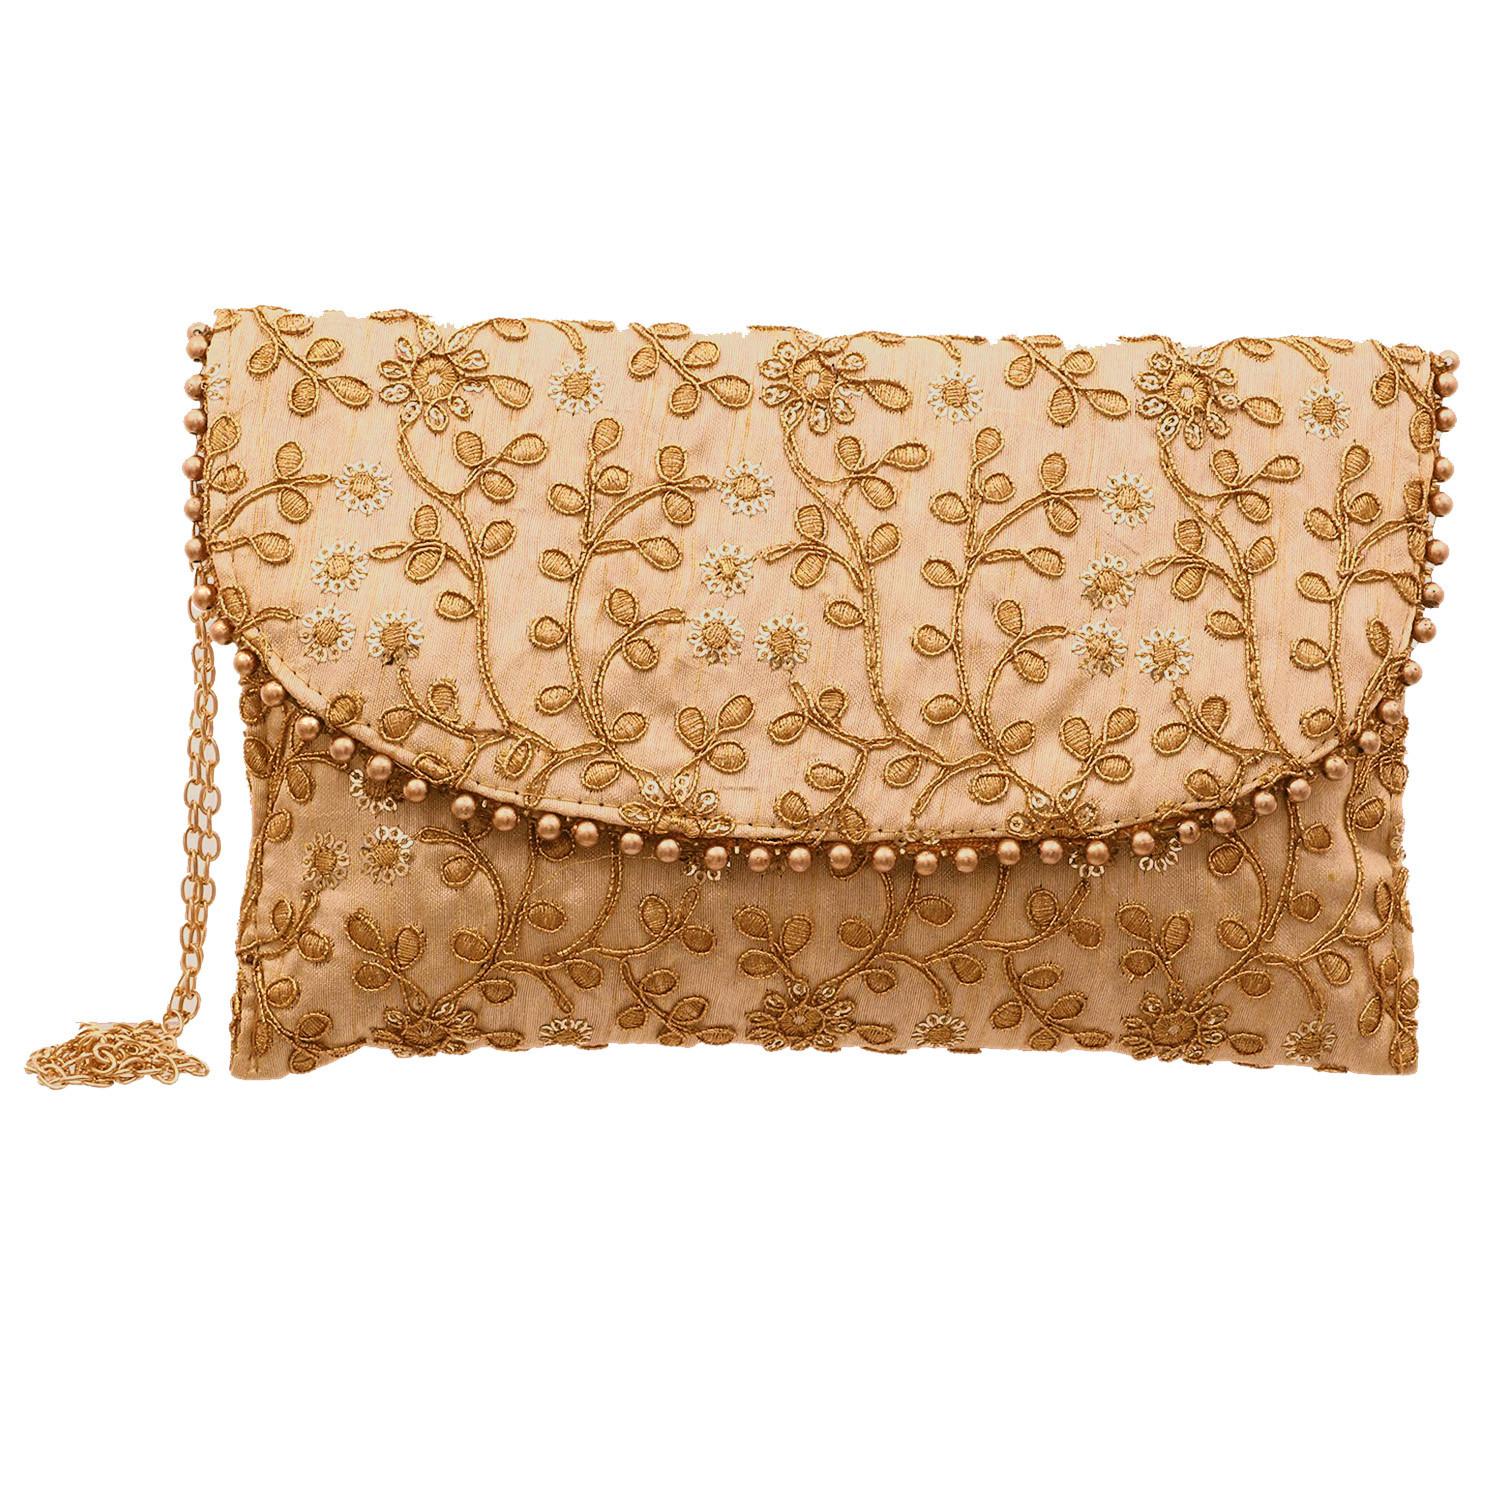 Kuber Industries Embroidery Golden Pearl Border Clutch|Hand Purse & Pearls Handle With Magnetic Lock For Woman,Girls (Peach)